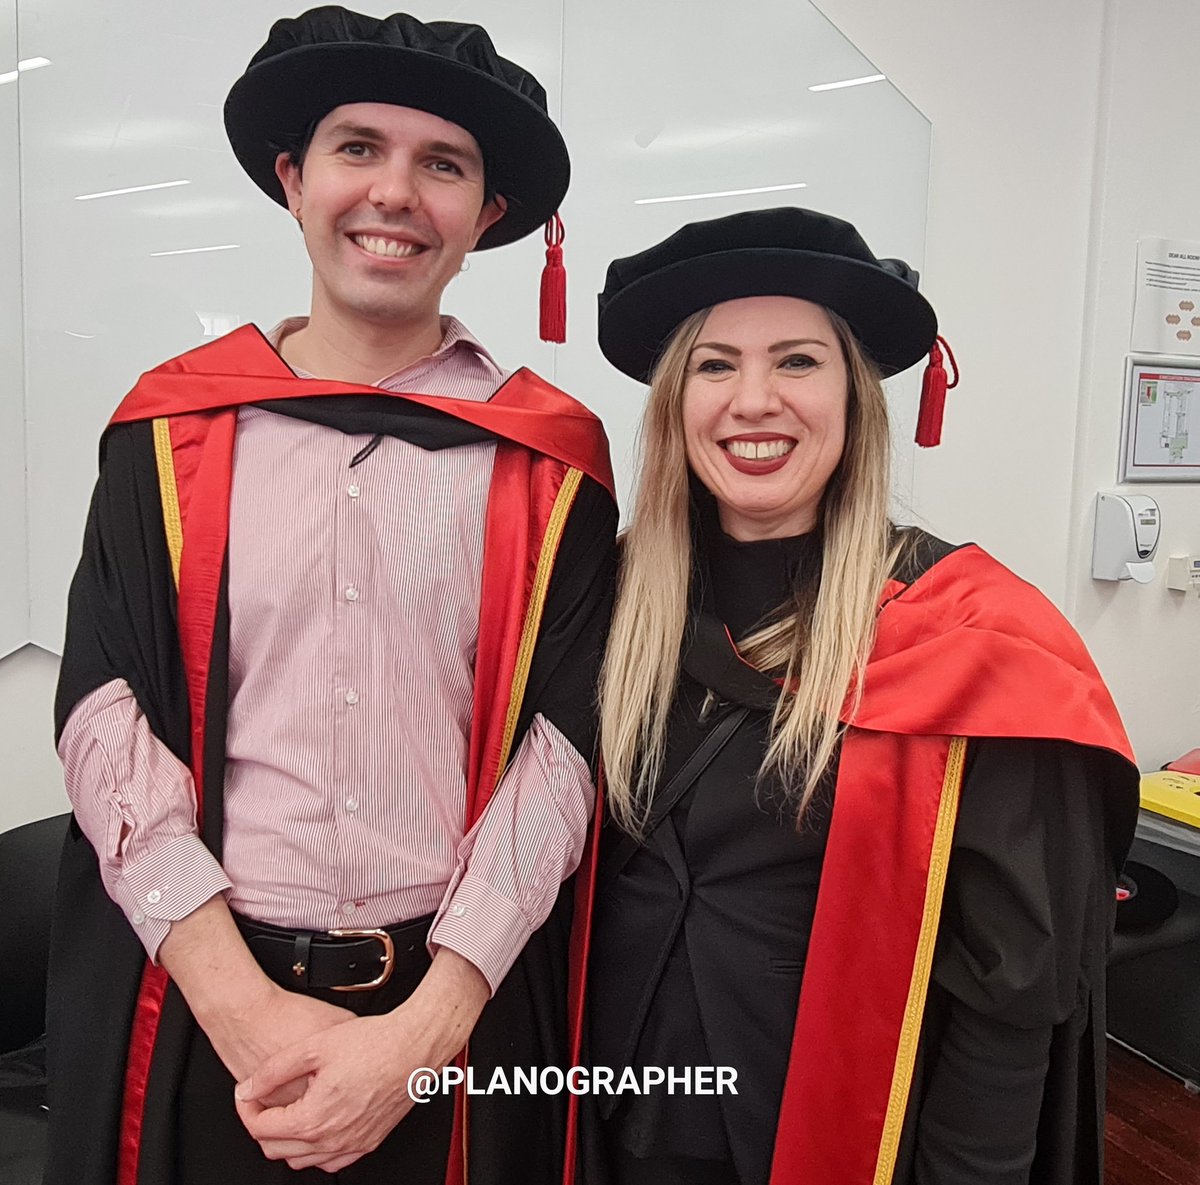 Congrats to @jacobroom and @fbellienizim on their #PhD graduation ceremony 2day. Welcome Dr Broom and Dr. Zimmerman. @uwanews @UWAresearch